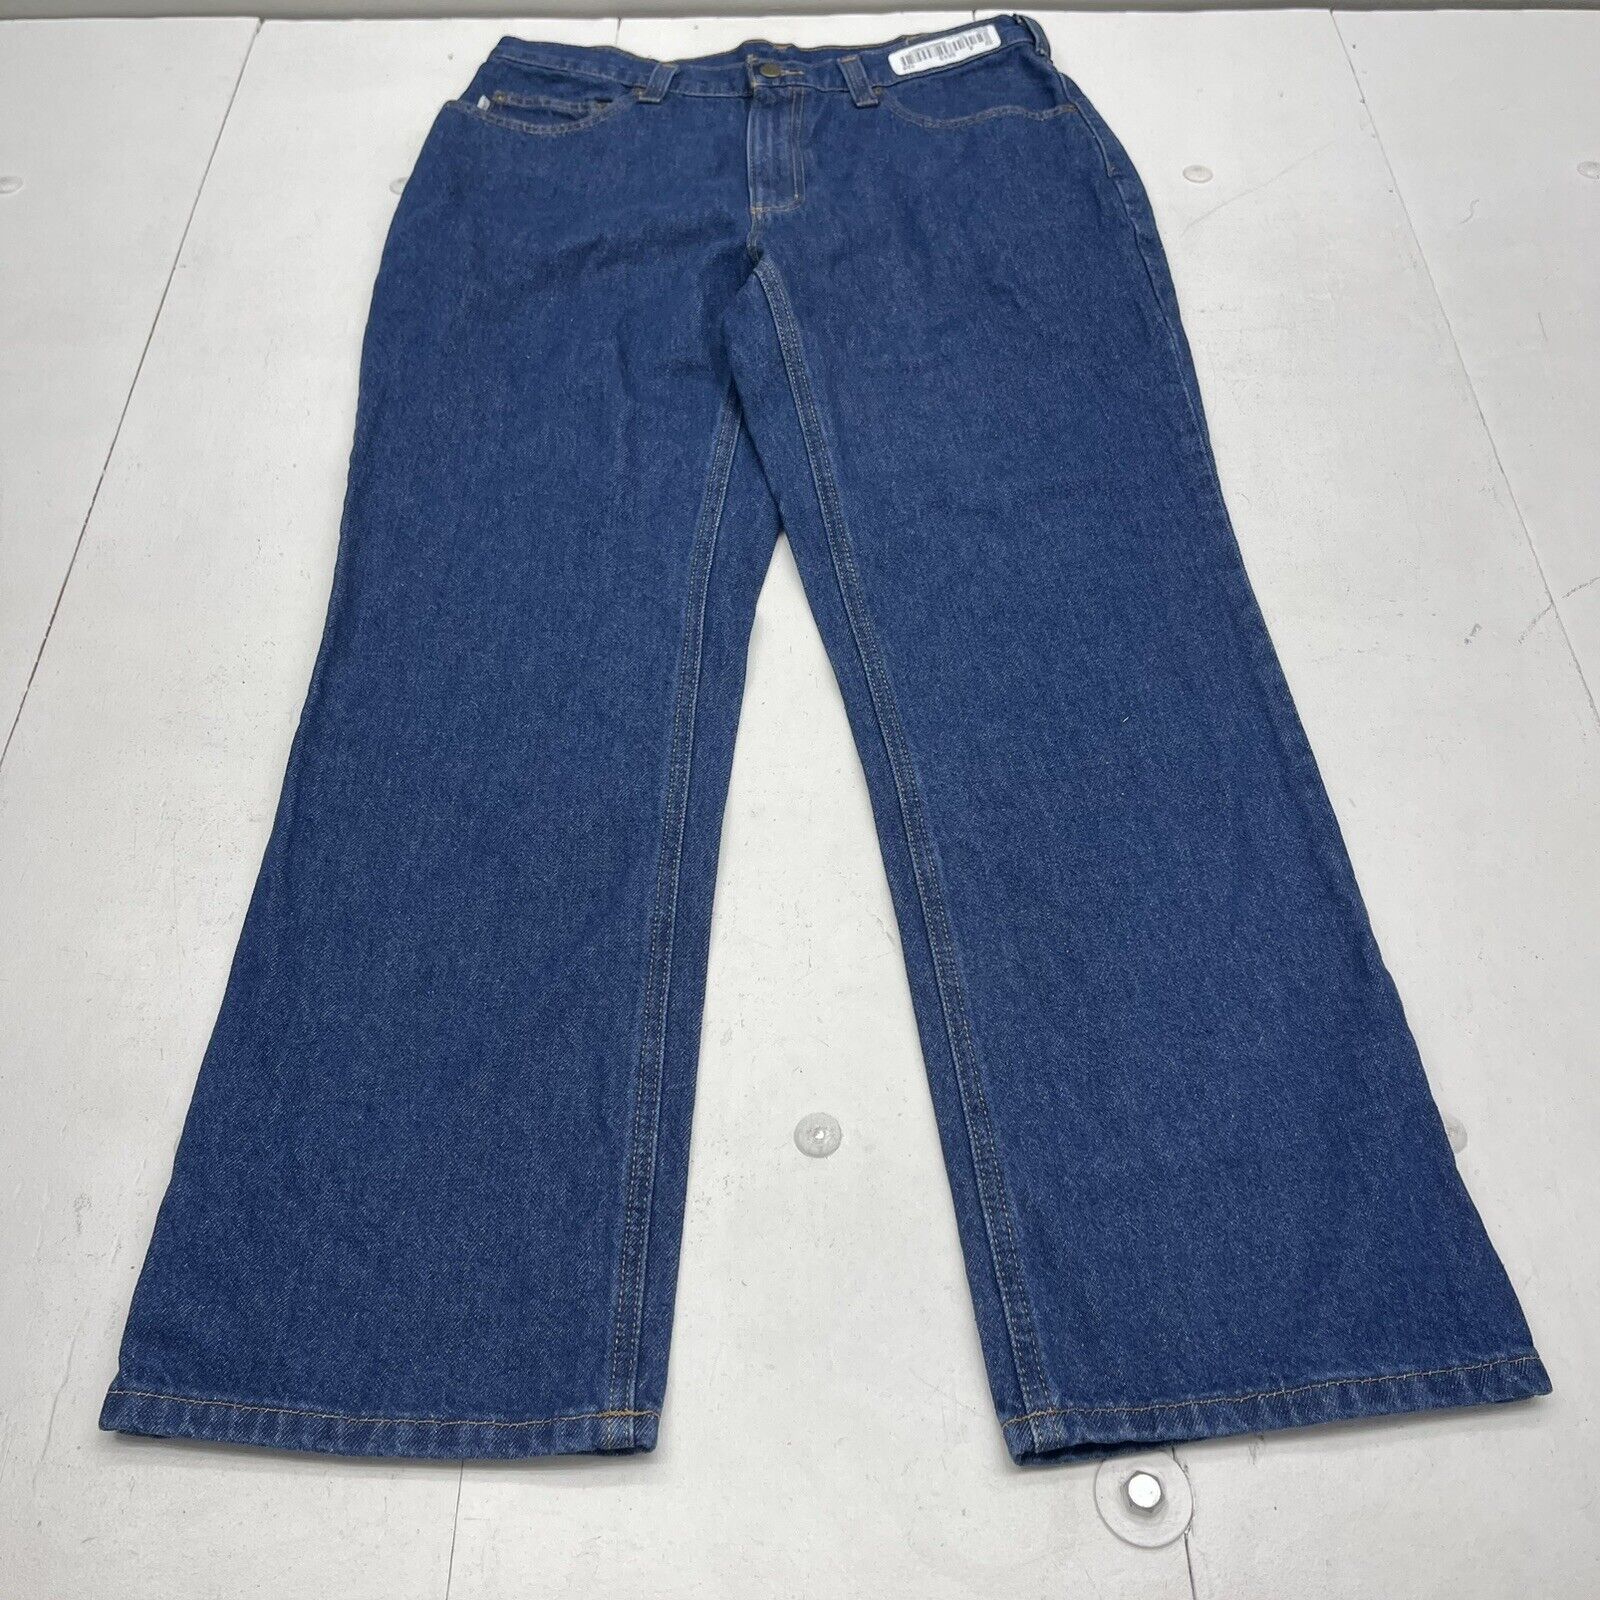 Carhartt 381-83 Relaxed Fit Blue Denim Works Jeans Mens Size 33/30 New